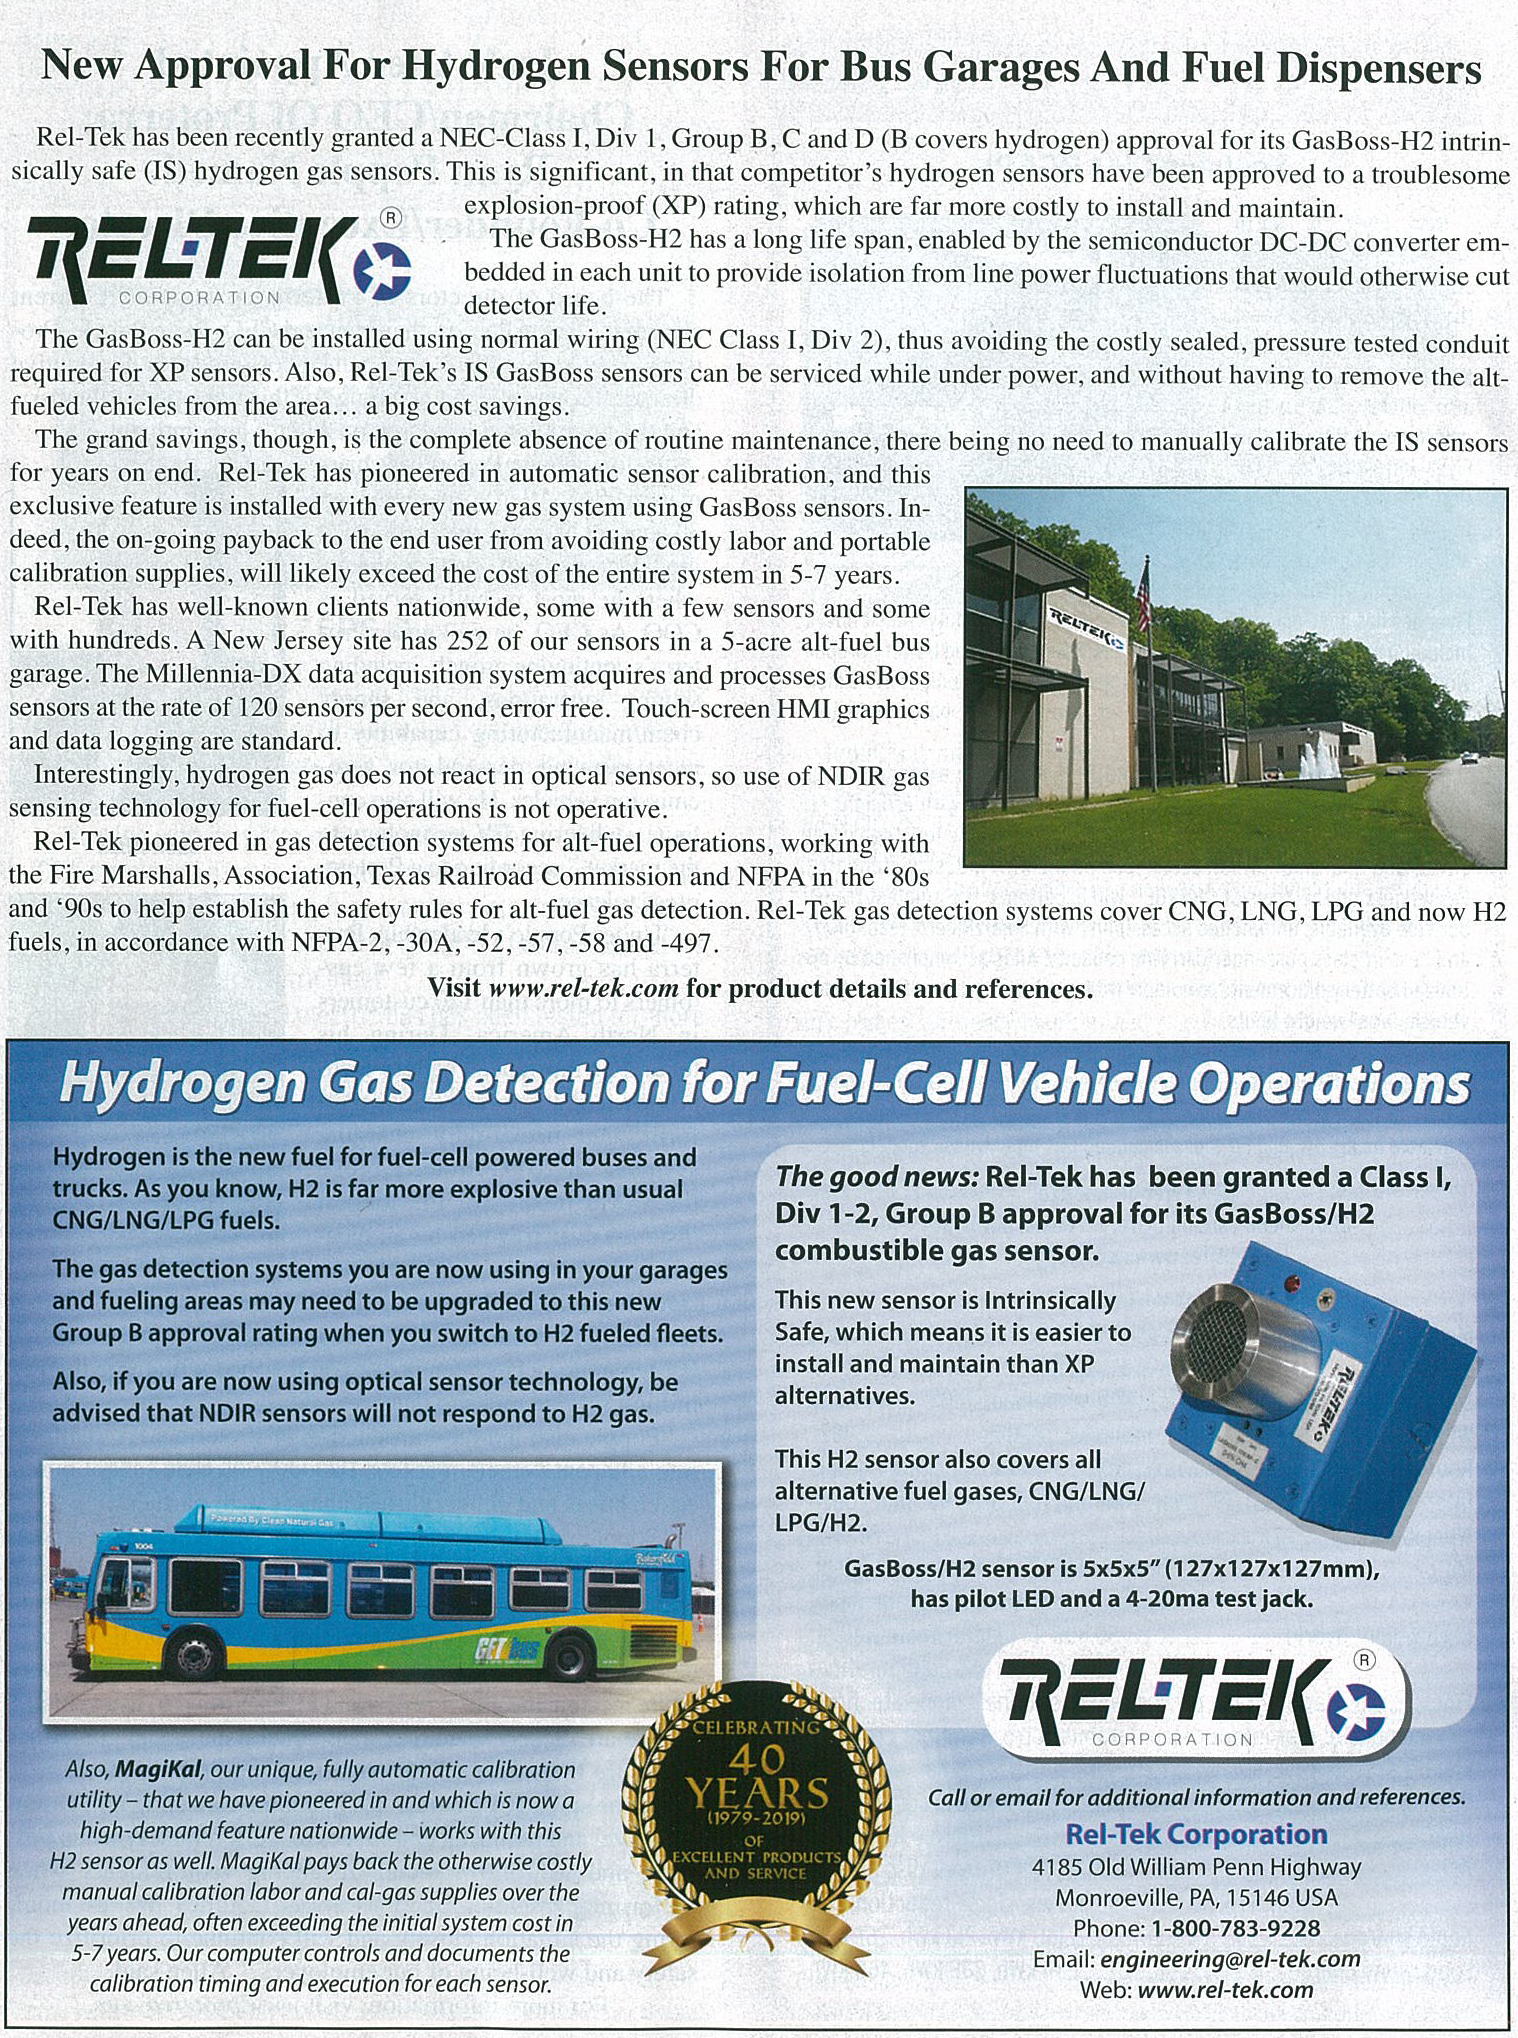 New Approval For Hydrogen Sensors For Bus Garages And Fuel Dispensers